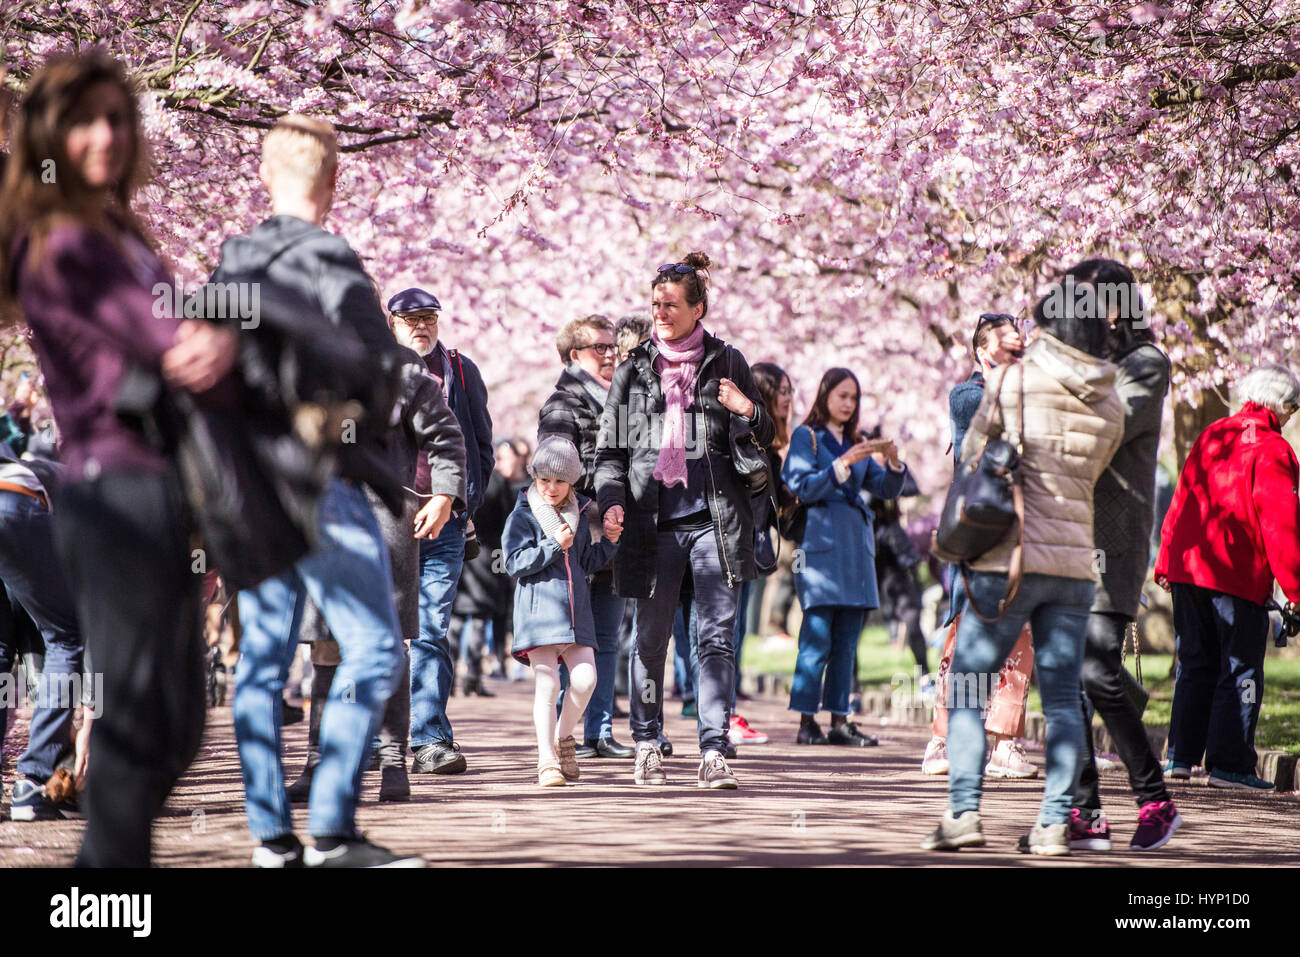 Copenhagen, Denmark. 6th April, 2017.  Spring has well and truly arrived in the Nordvest district of Copenhagen, Denmark. On Thursday morning, hundreds of people flocked to the grounds of Bispebjerg Cemetery to admire and photograph the impressive Cherry Blossom trees that have recently come in to bloom.    Credit: Matthew James Harrison/Alamy Live News Stock Photo